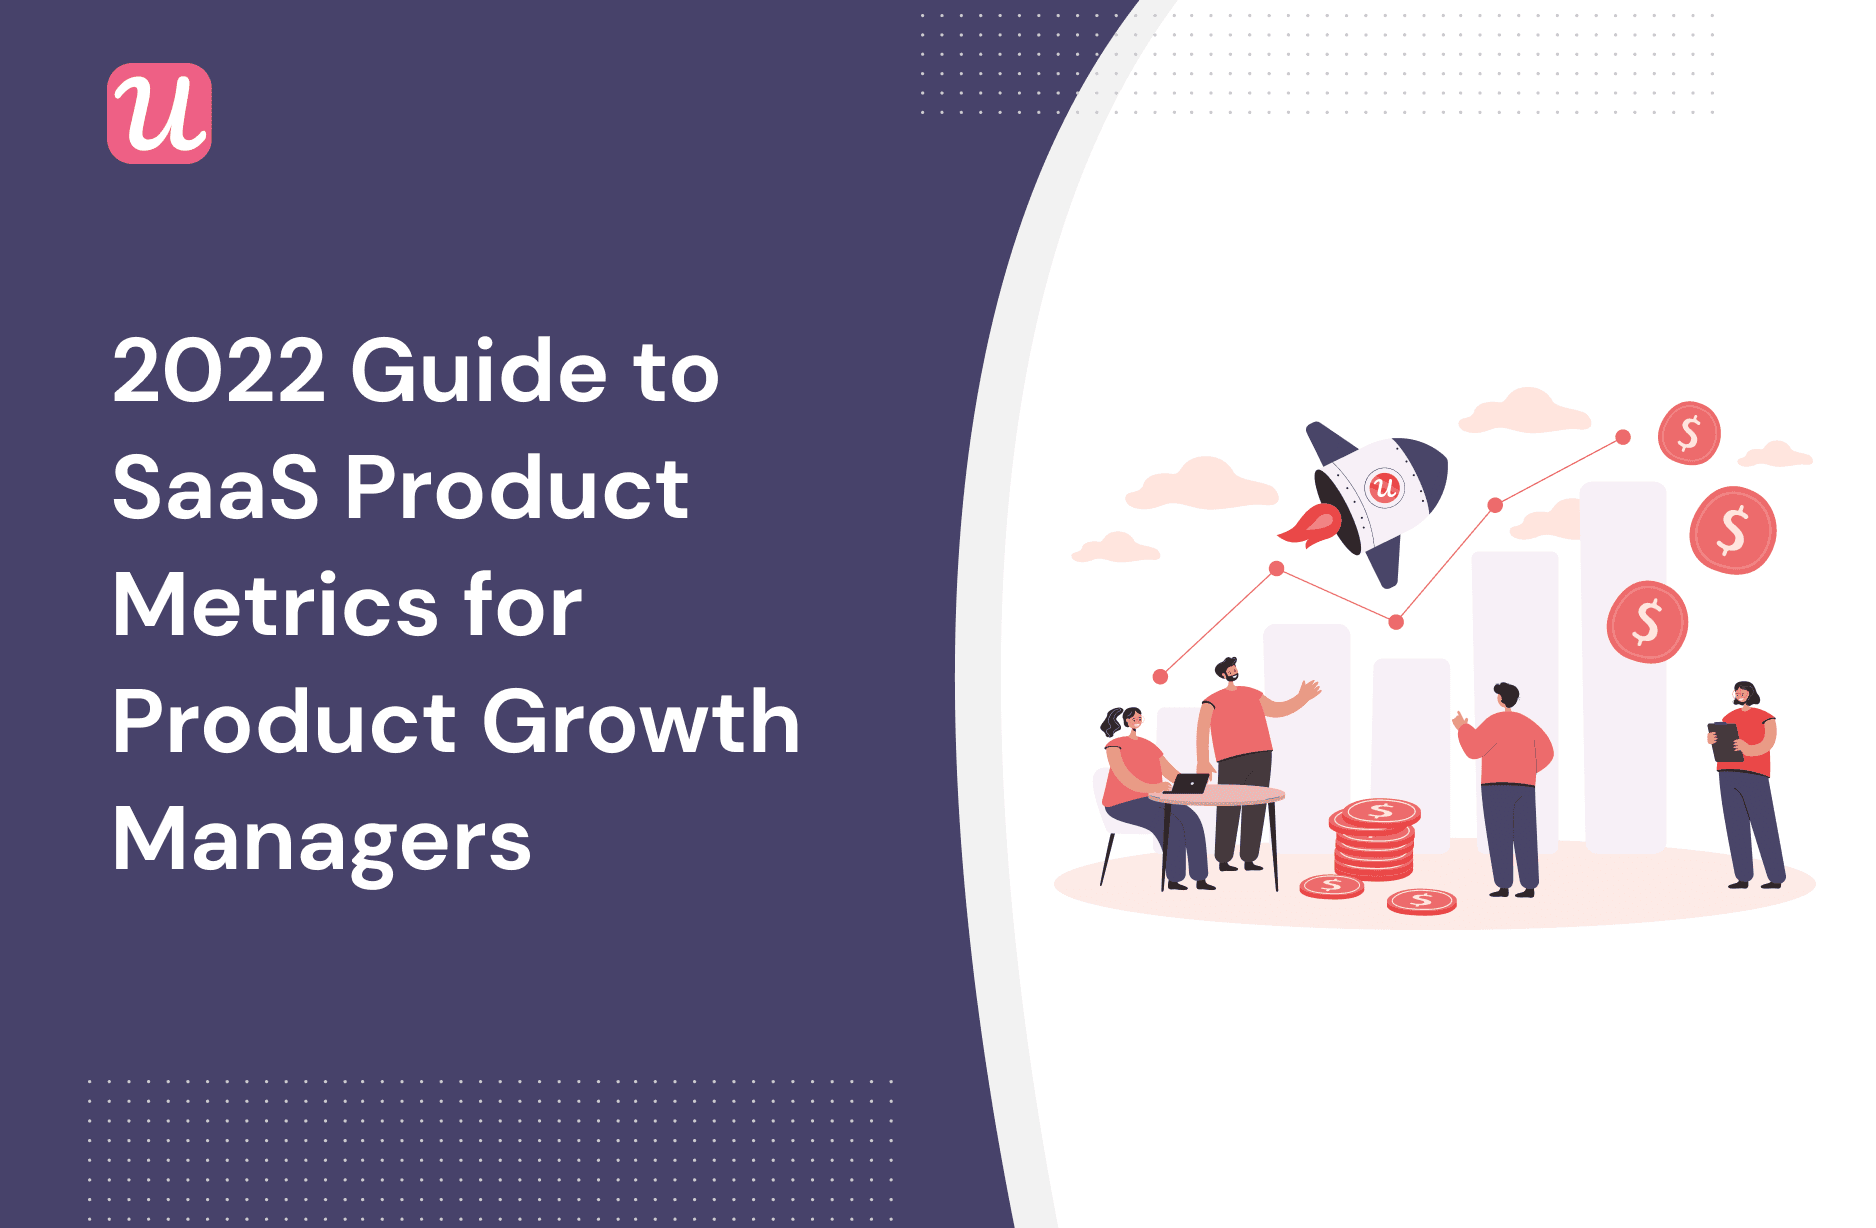 2022 Guide To SaaS Product Metrics For Product Growth Managers